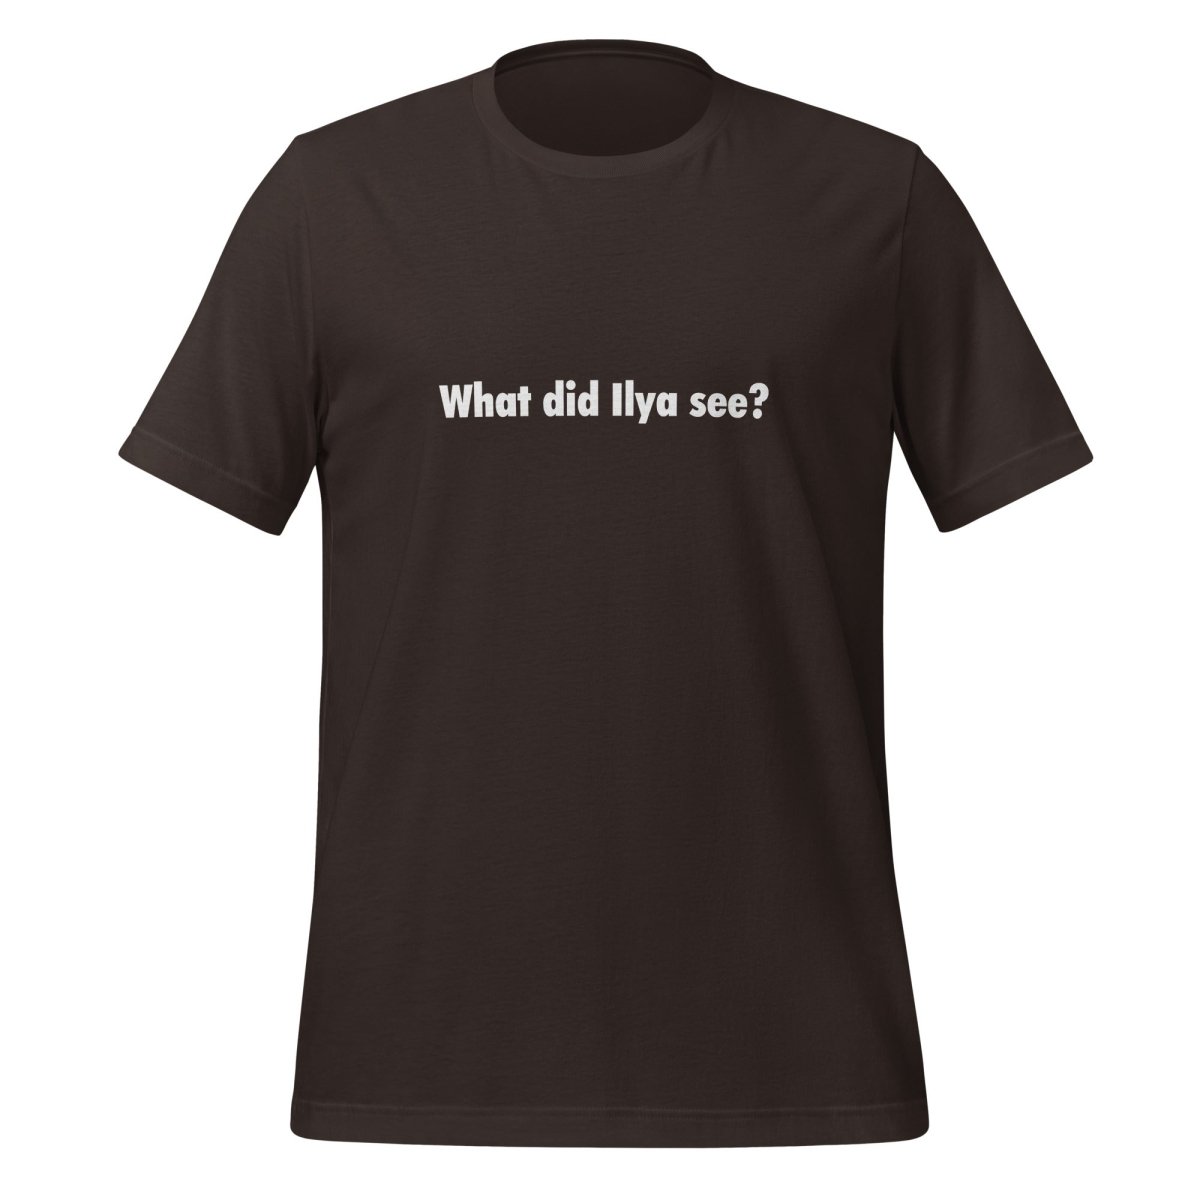 What did Ilya see? T - Shirt 3 (unisex) - Brown - AI Store